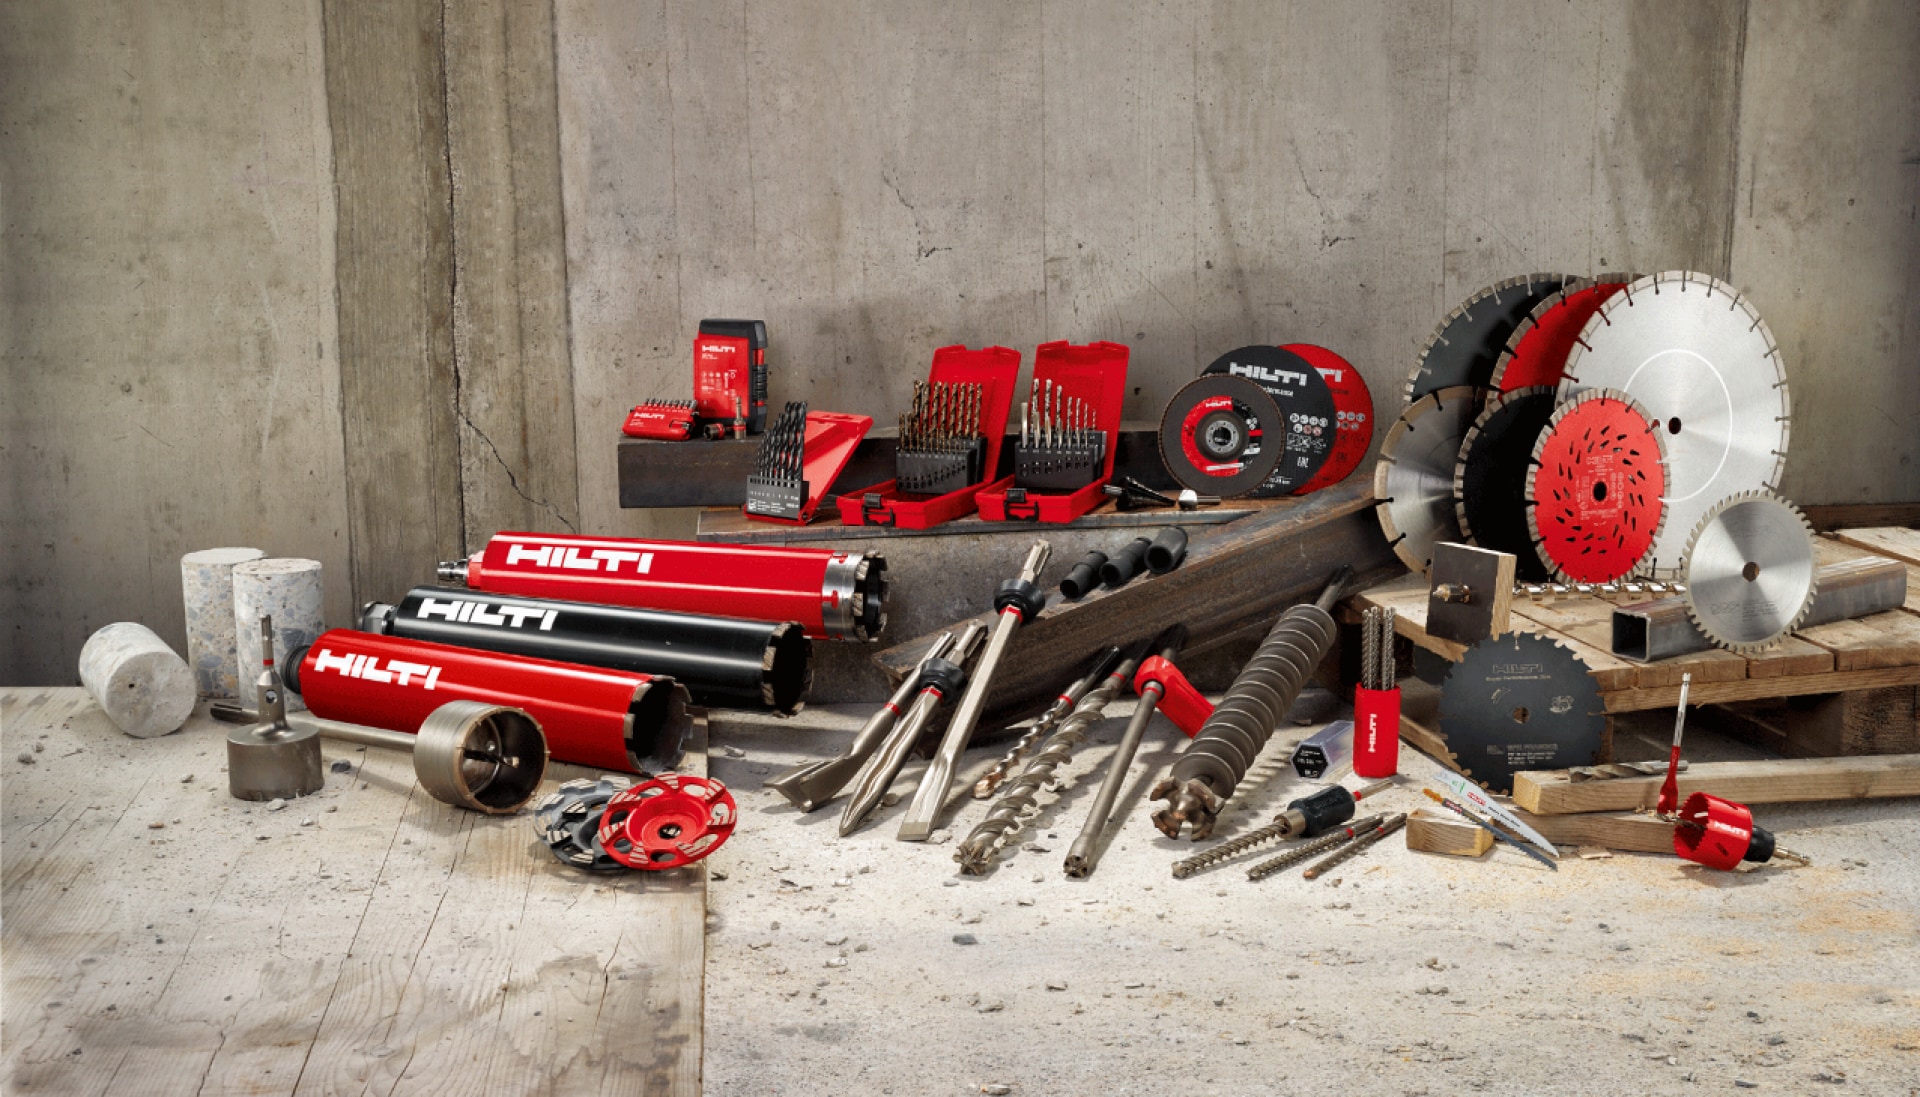 Hilti offers consumables customized for your application and budget